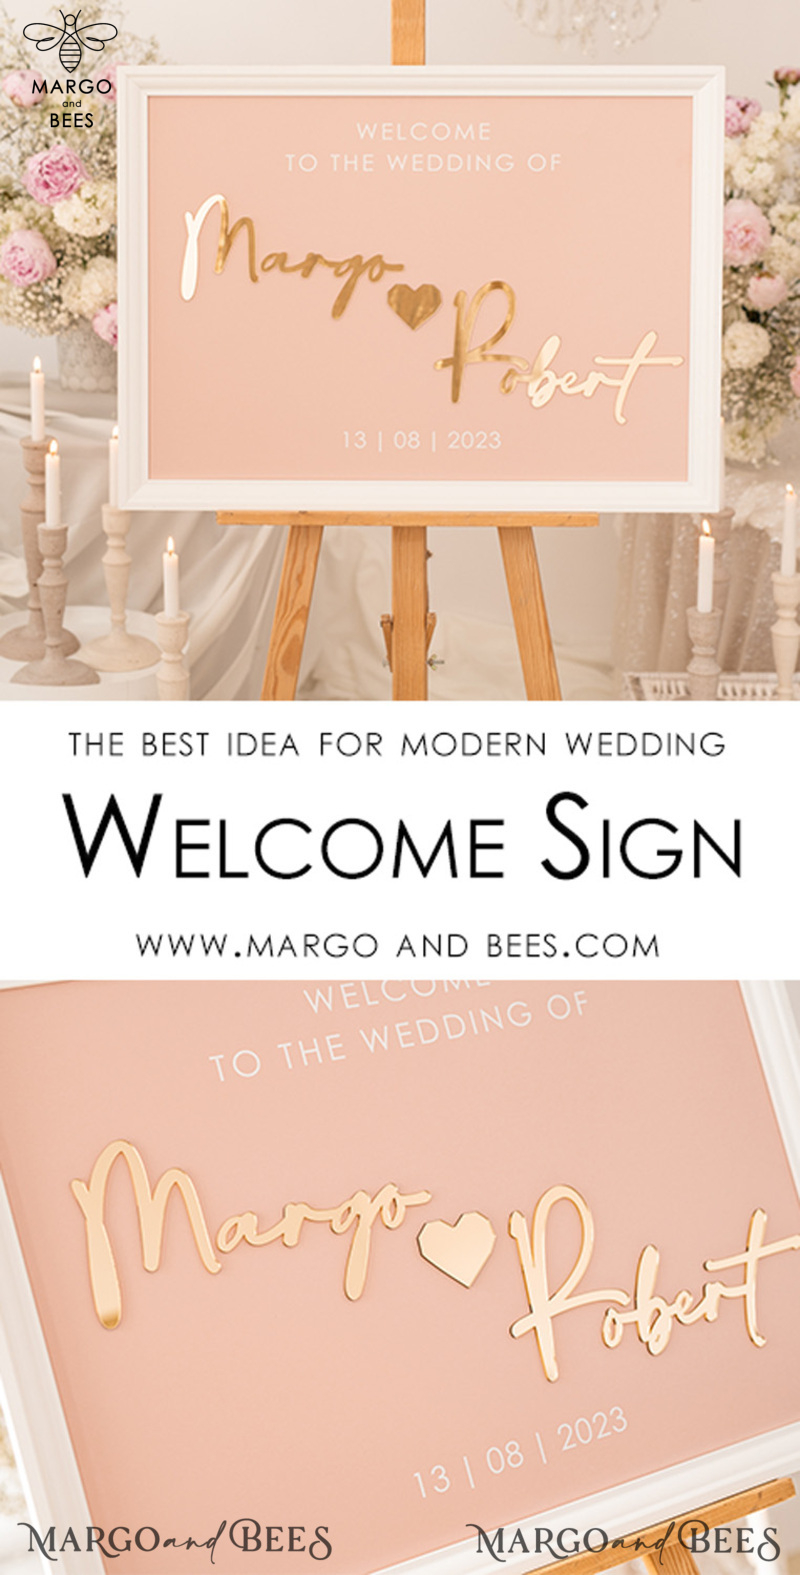 Blush and Gold Modern Acrylic wedding welcome sign, 3d Elegant wedding welcome signs - Wedding Reception Decor, Wedding Table Plan in White Frame, Wedding Decoration with golden letters - Reception Signage - Custom Ceremony Sign BpPXSet-1